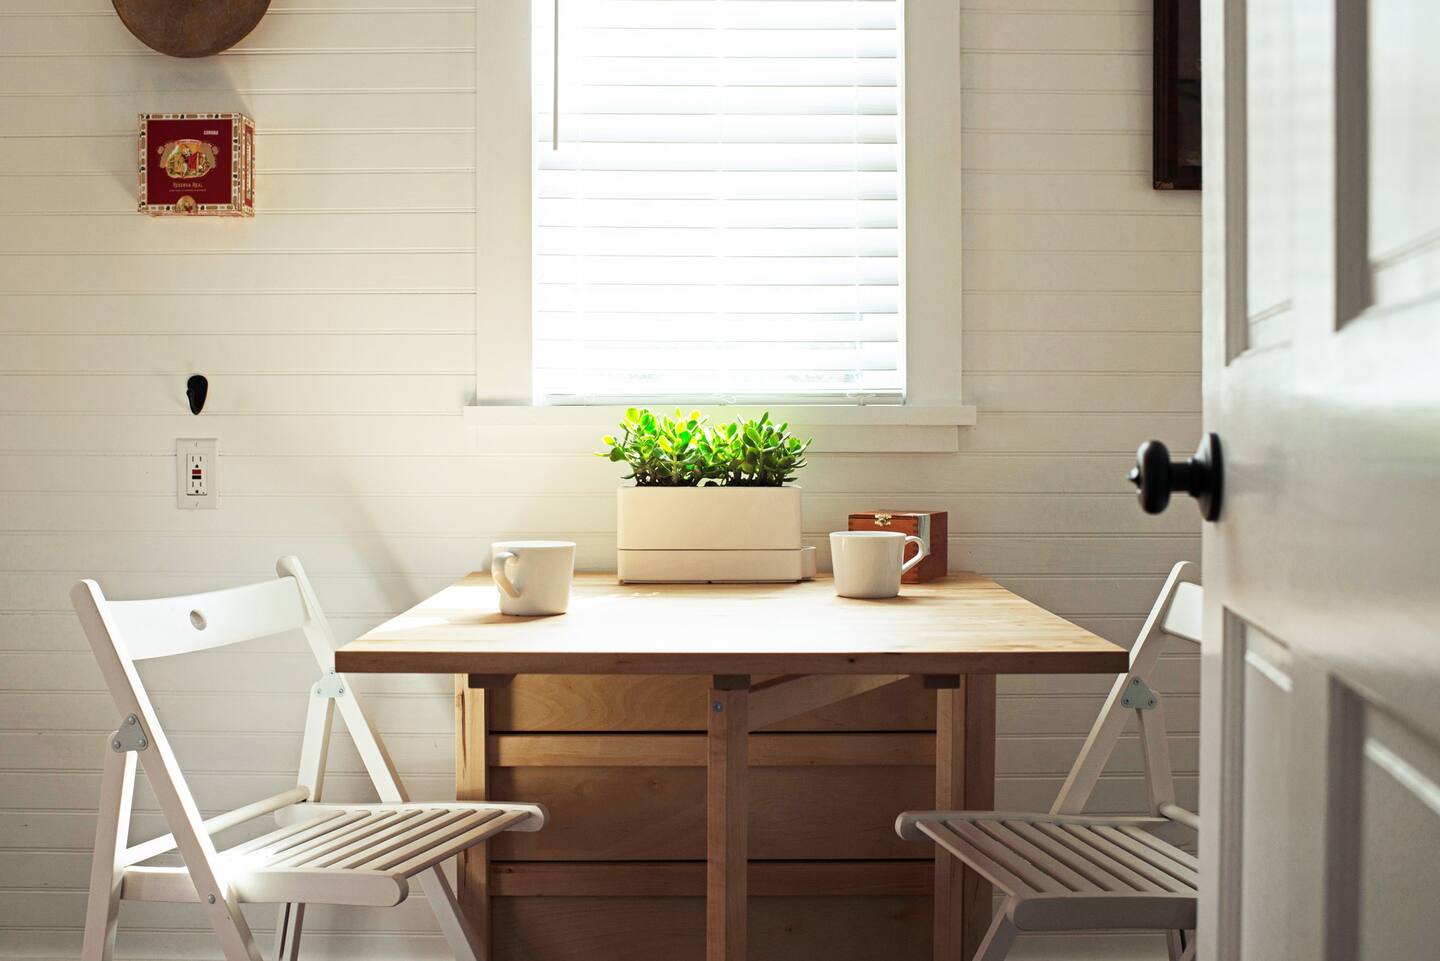 Dining room in the small kitchen with two white chairs and small wooden desk